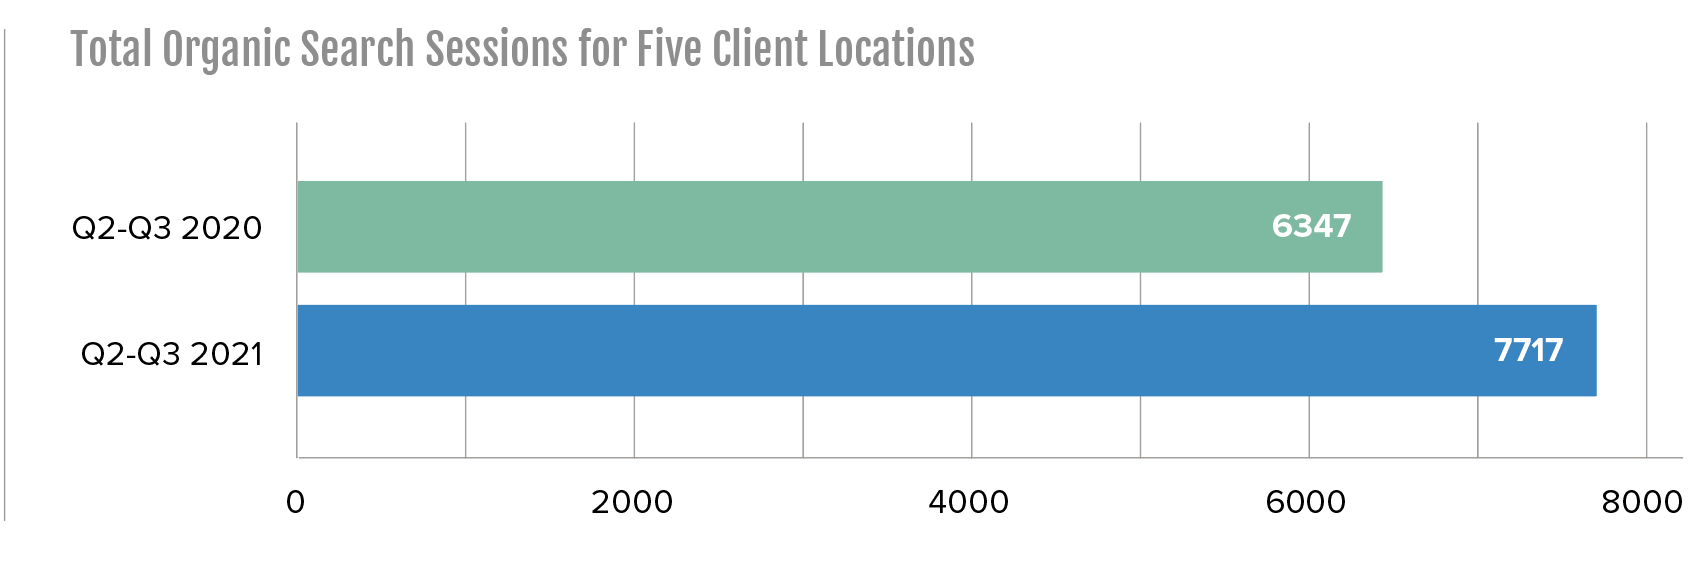 total organic search sessions for 5 client locations